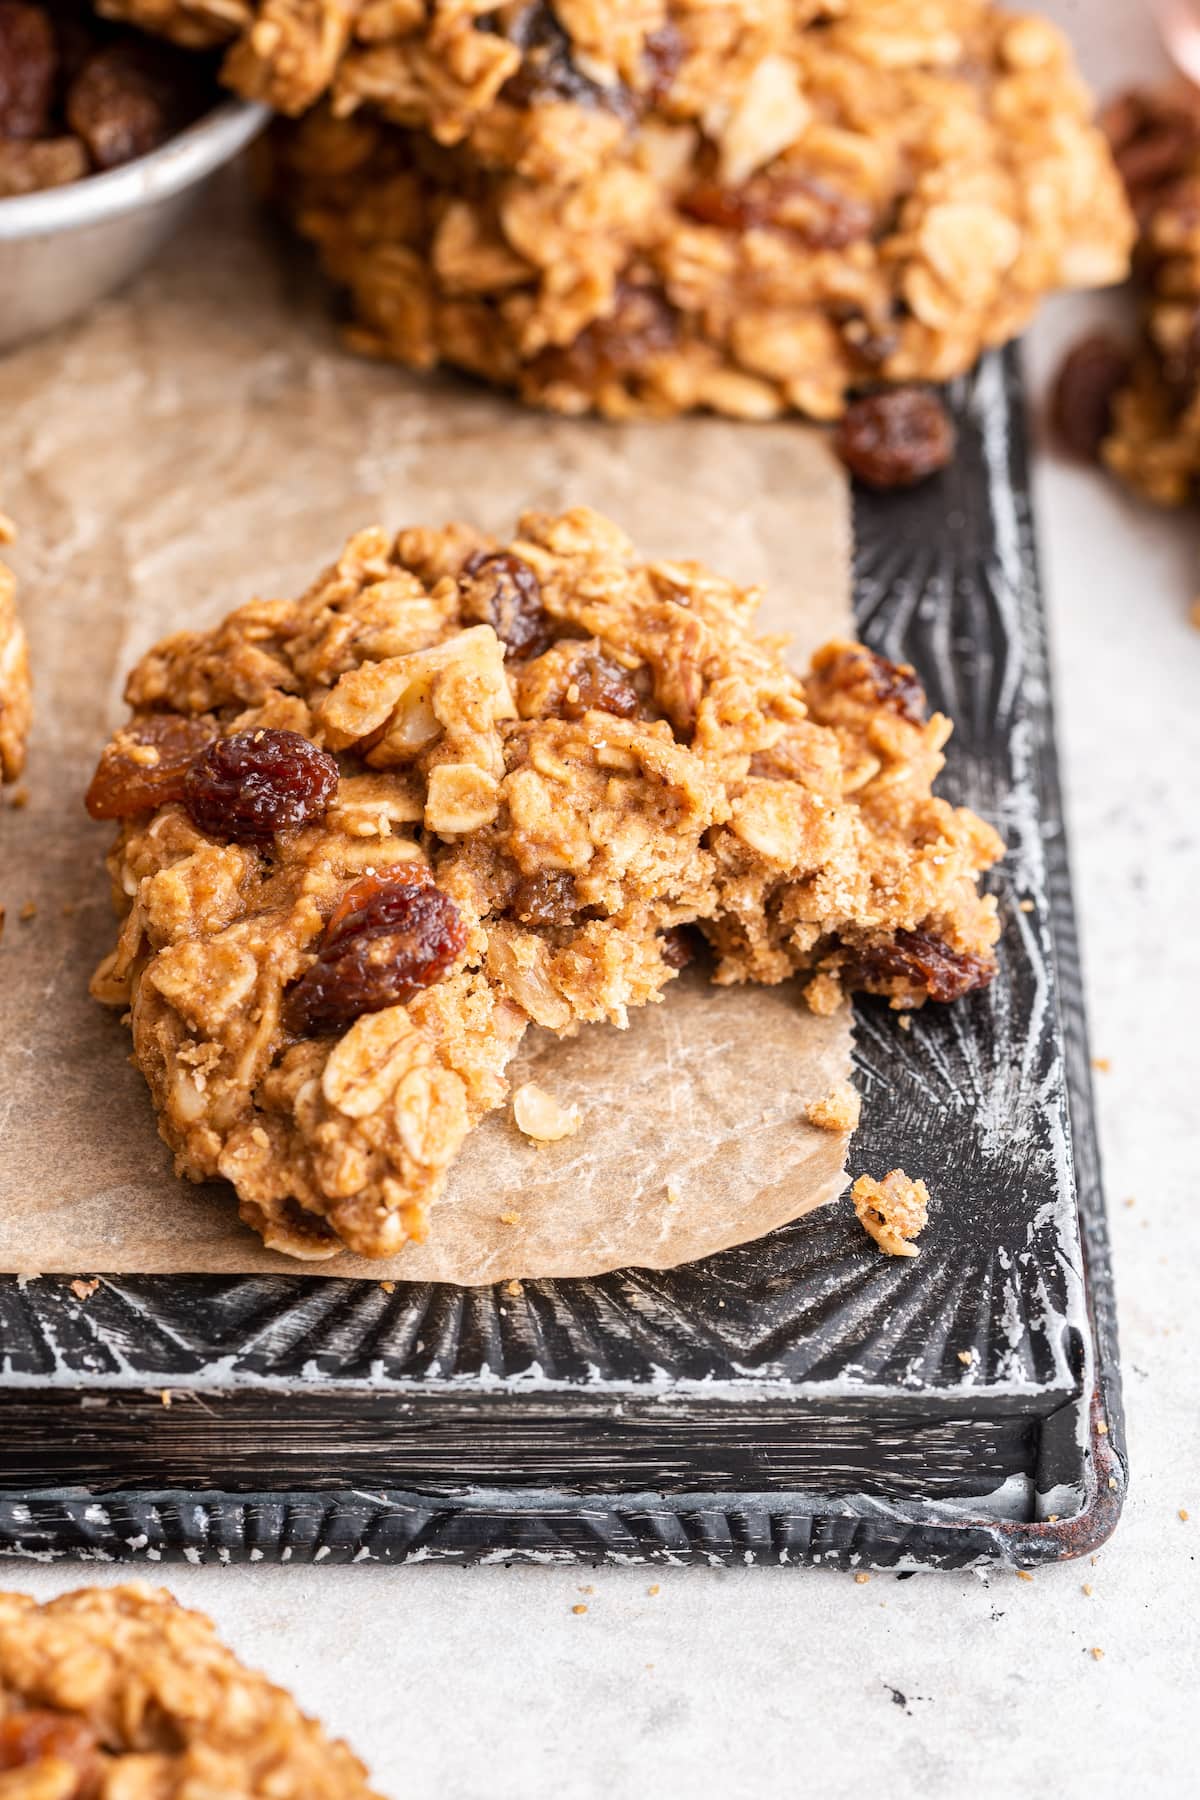 An oatmeal breakfast cookie with a bite taken from it.